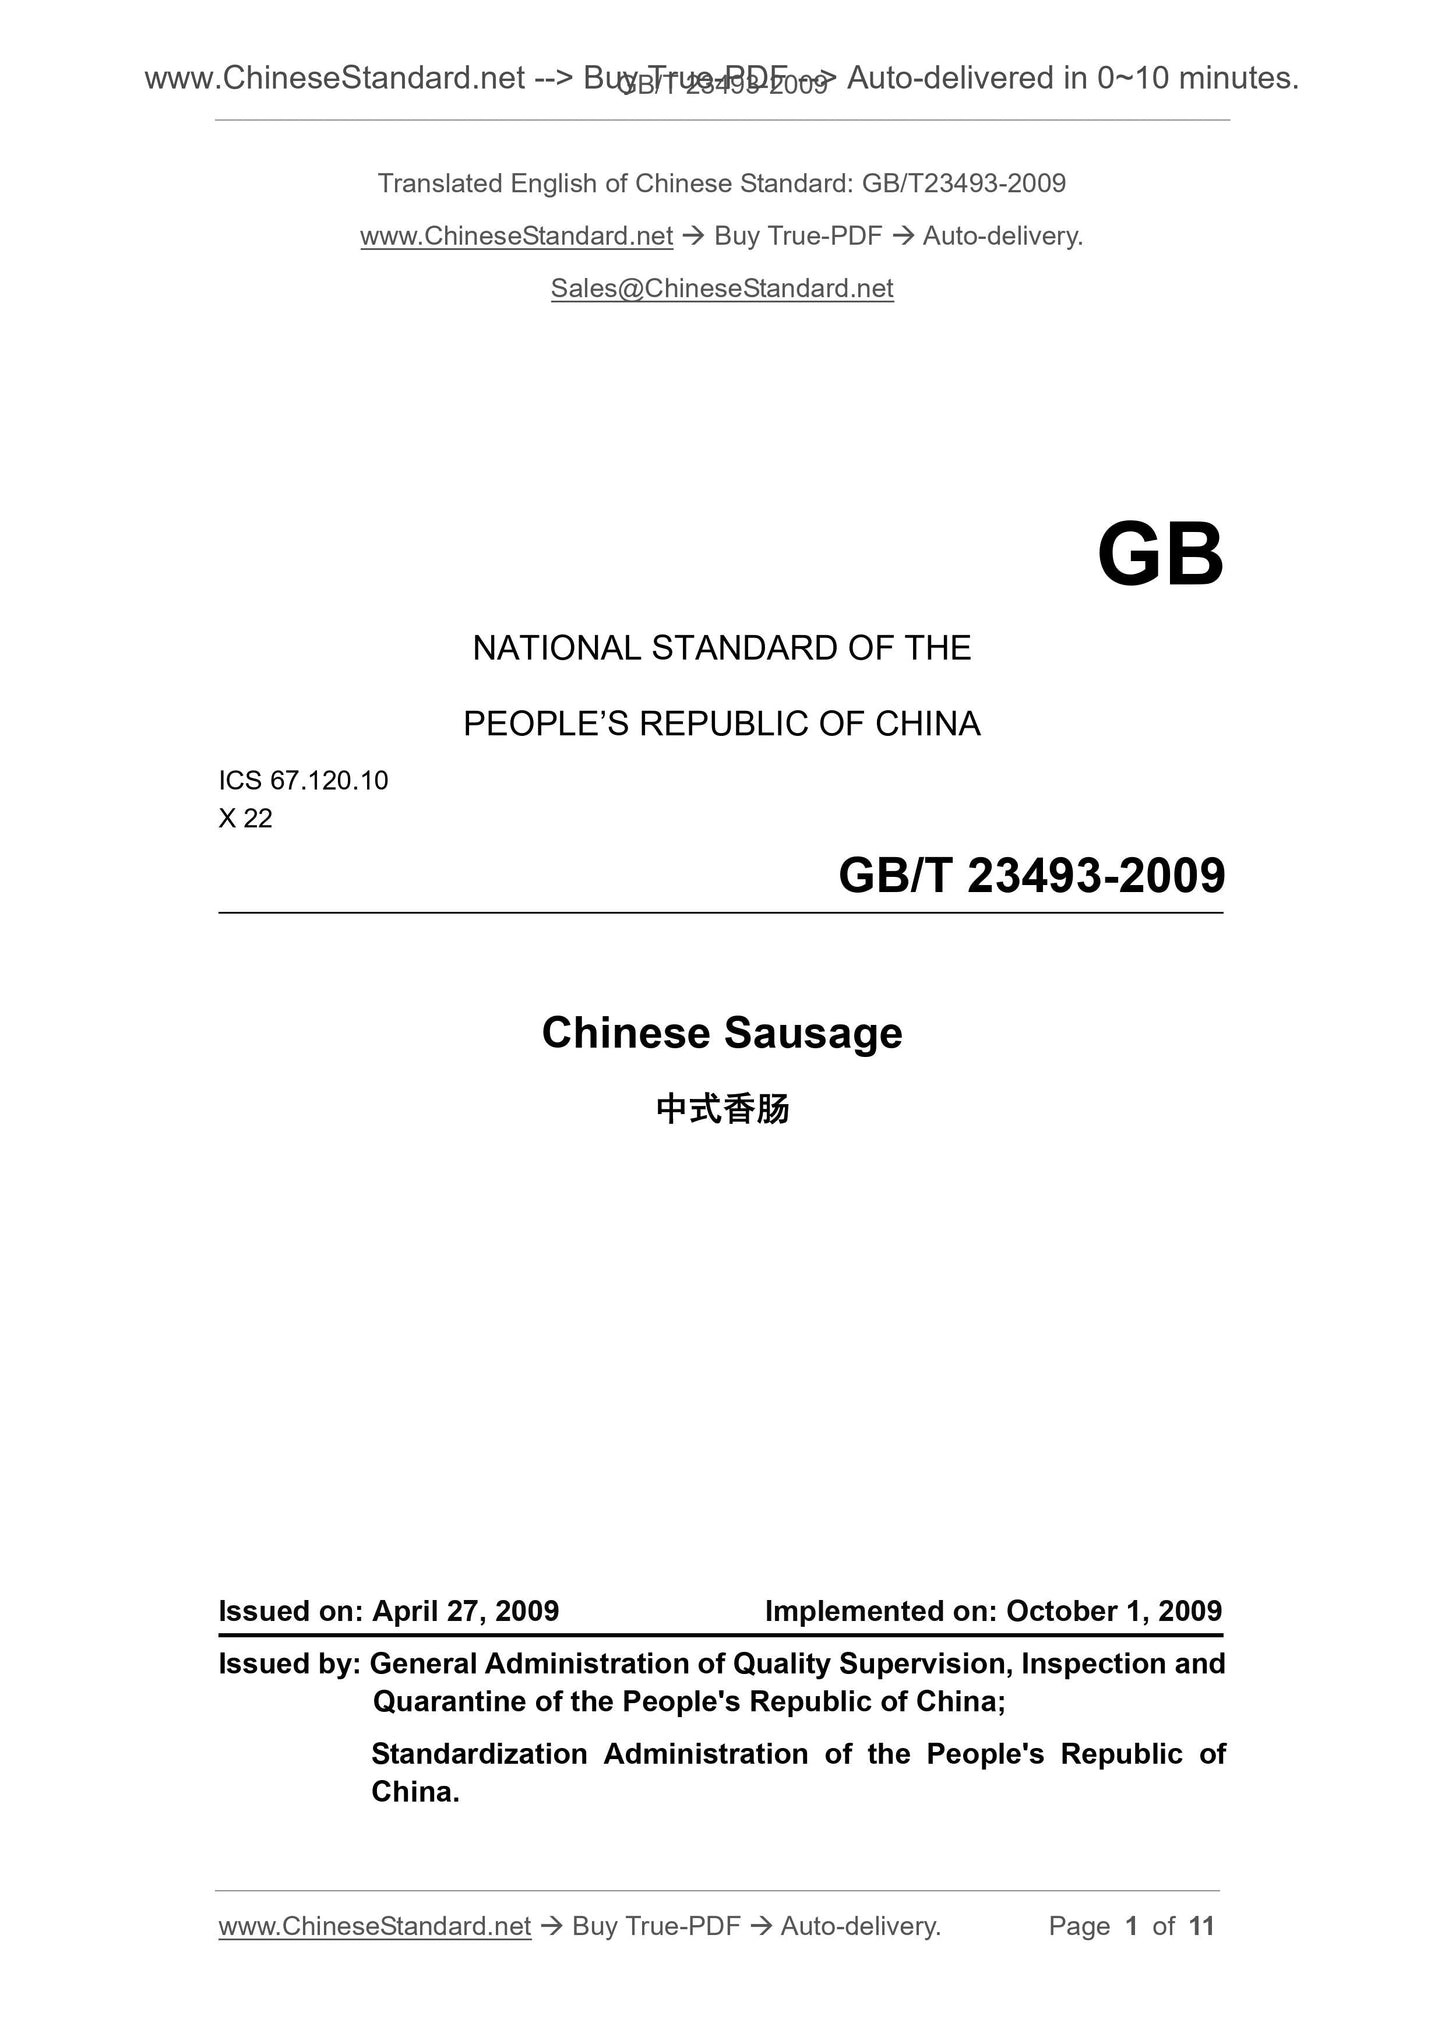 GB/T 23493-2009 Page 1